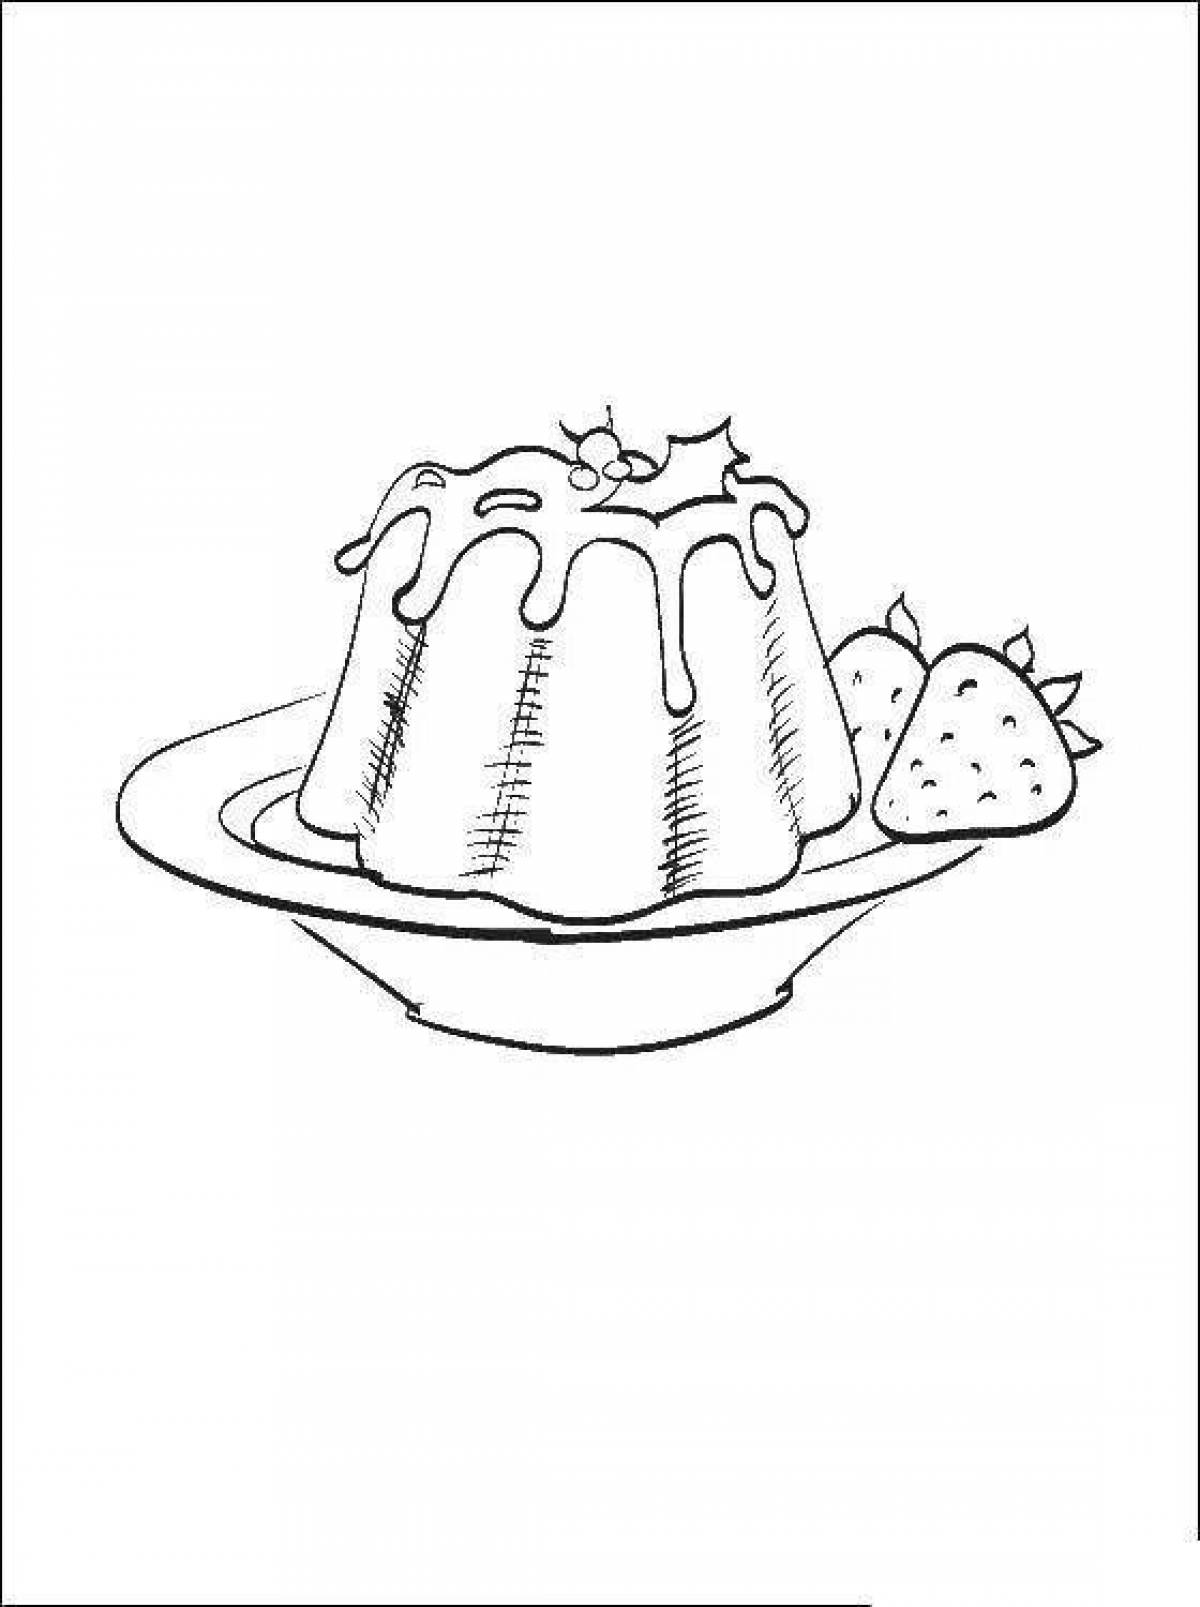 Stimulating jelly coloring page